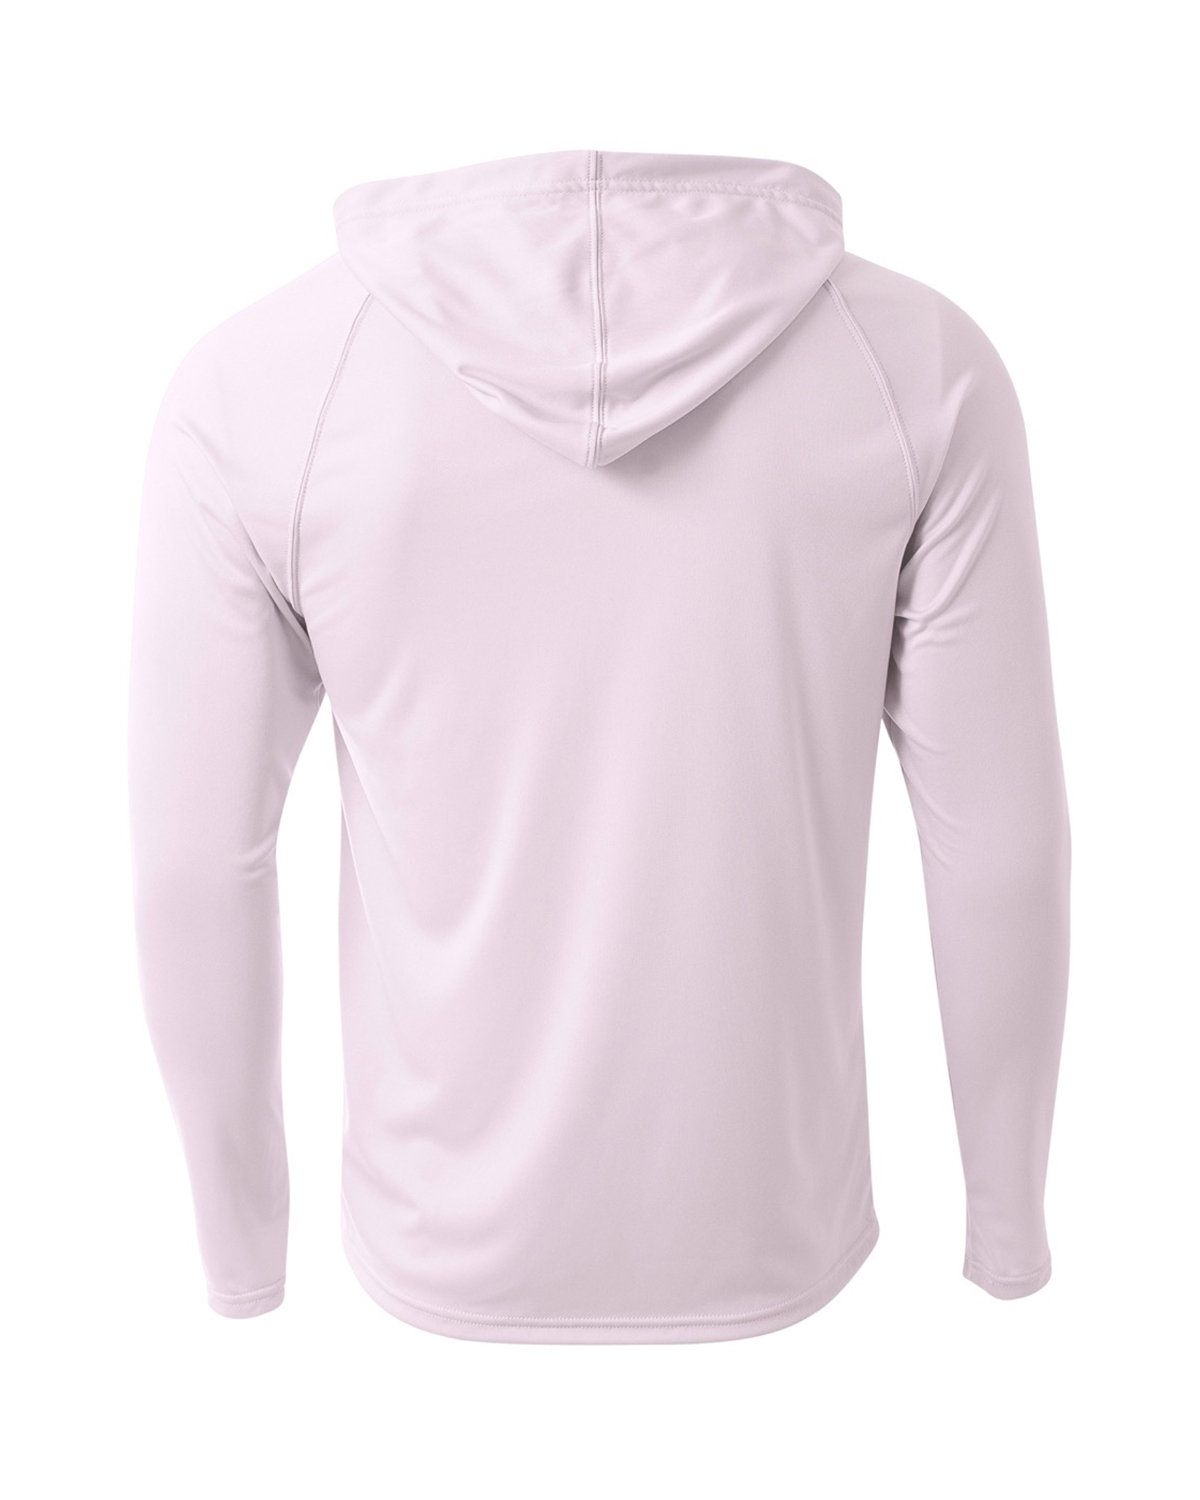 A4 Men's Cooling Performance Long-Sleeve Hooded T-shirt | Generic Site ...